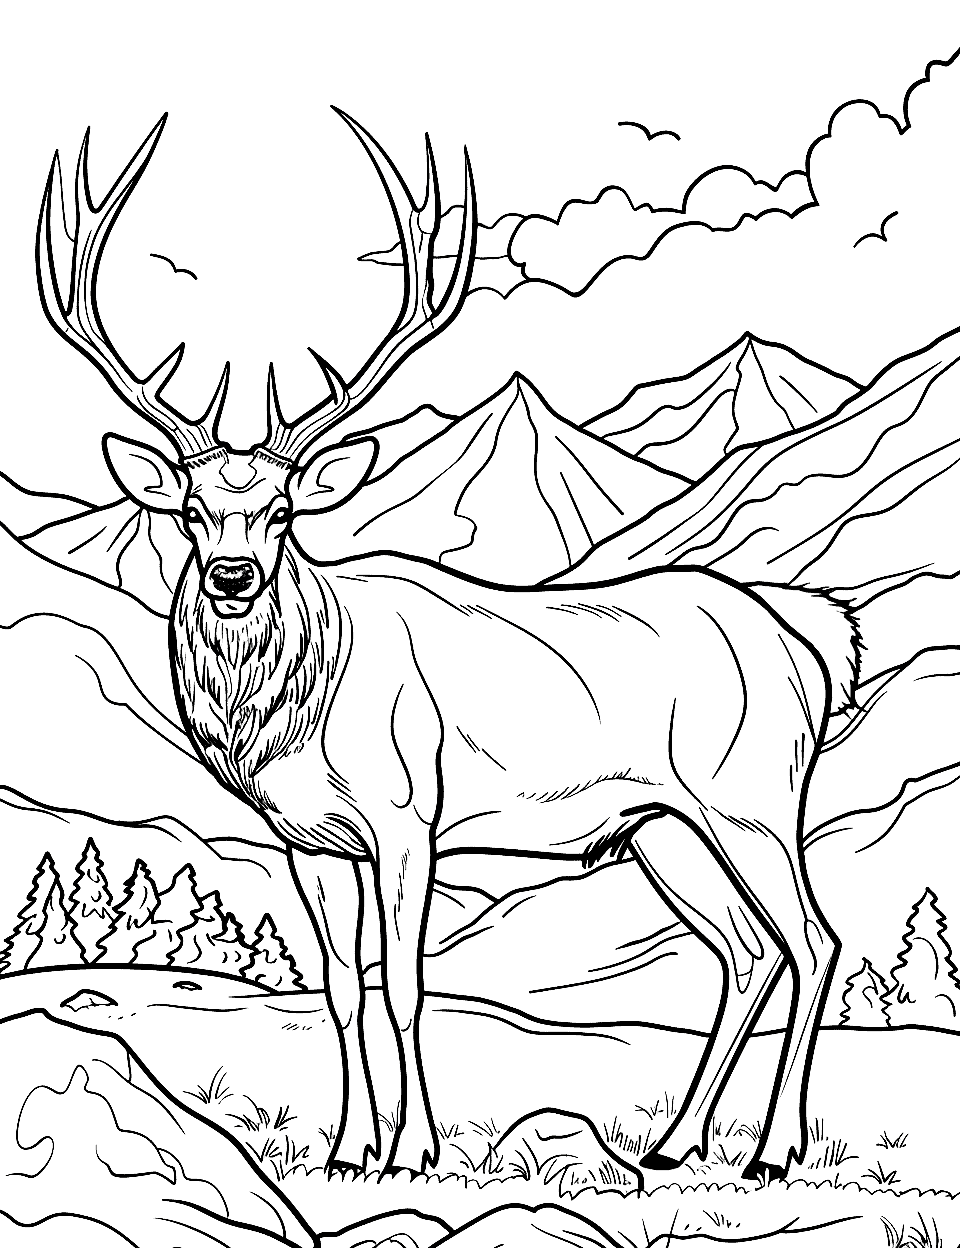 Elk in the Rocky Mountains Coloring Page - A majestic elk standing with a backdrop of towering mountains.